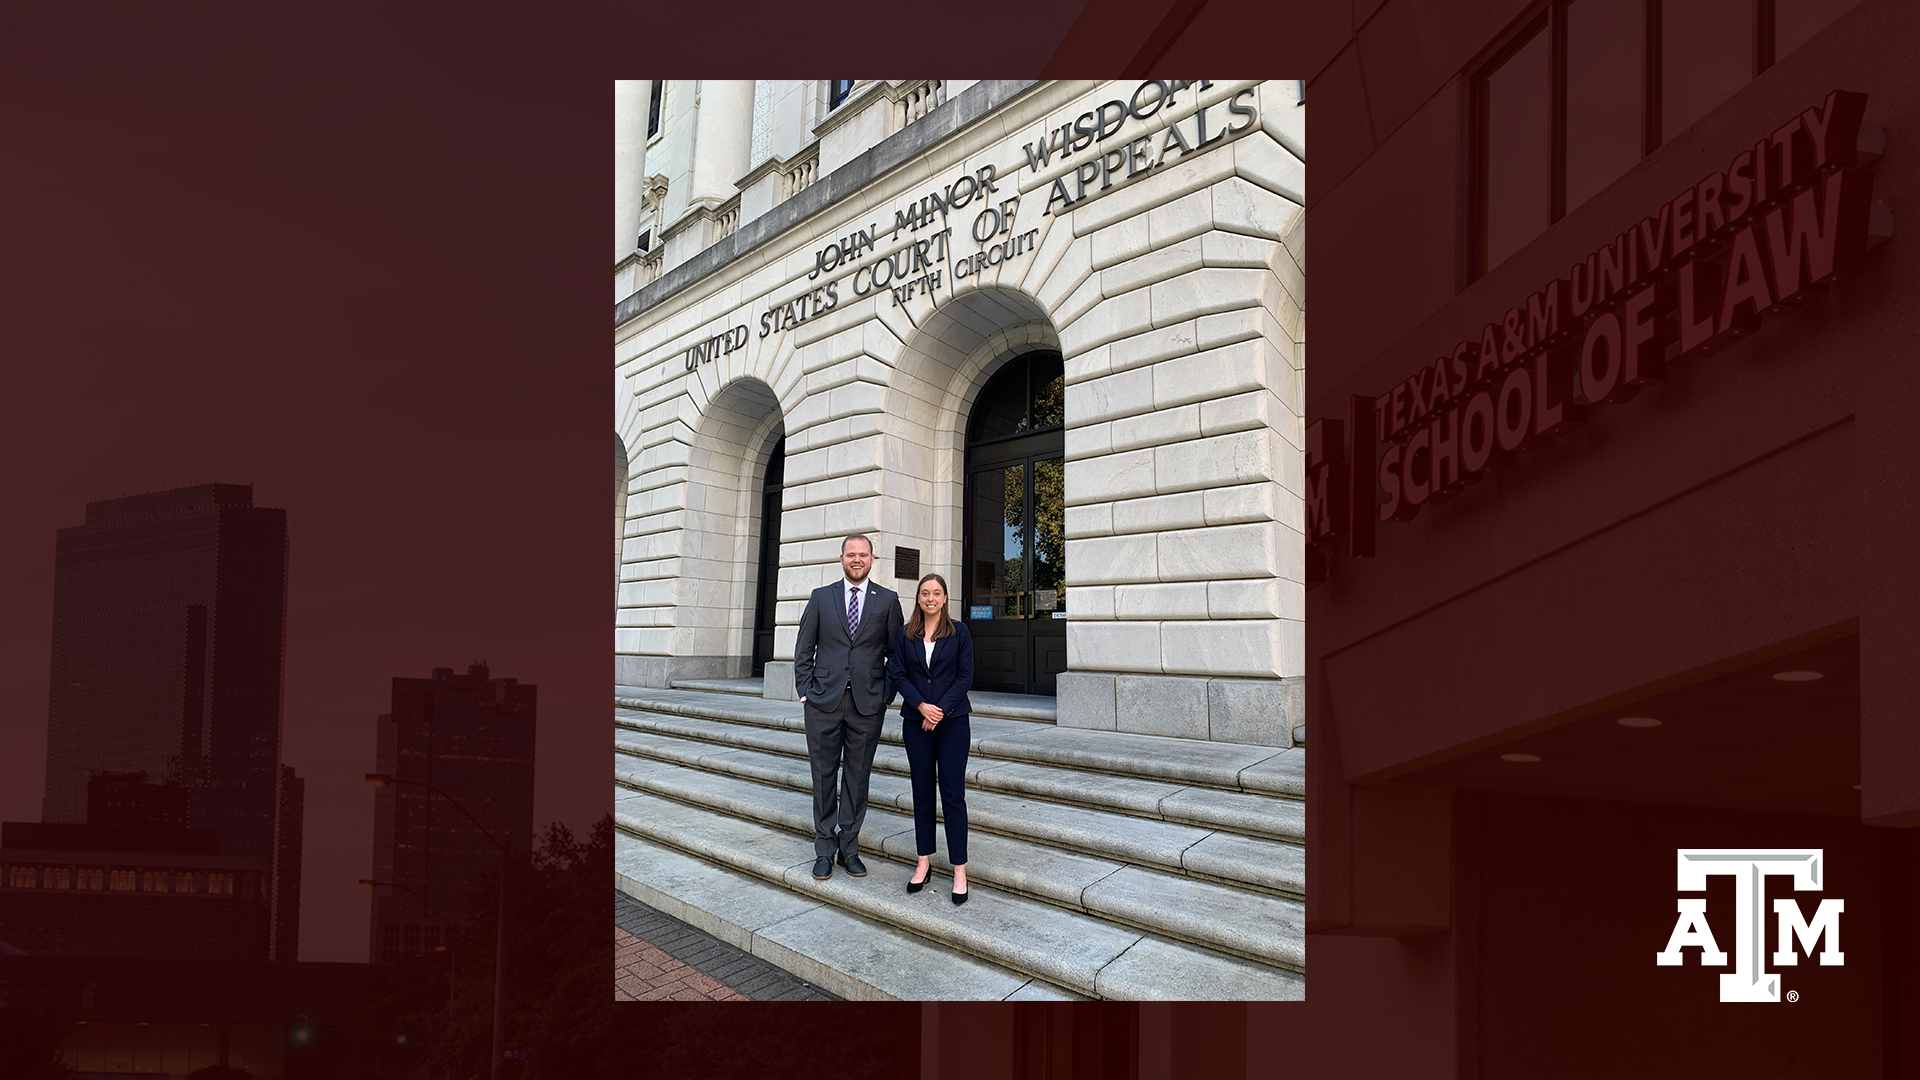 James Jackson (left) and Samantha Davis (right) stand in front of the John Minor Wisdom Courthouse in New Orleans